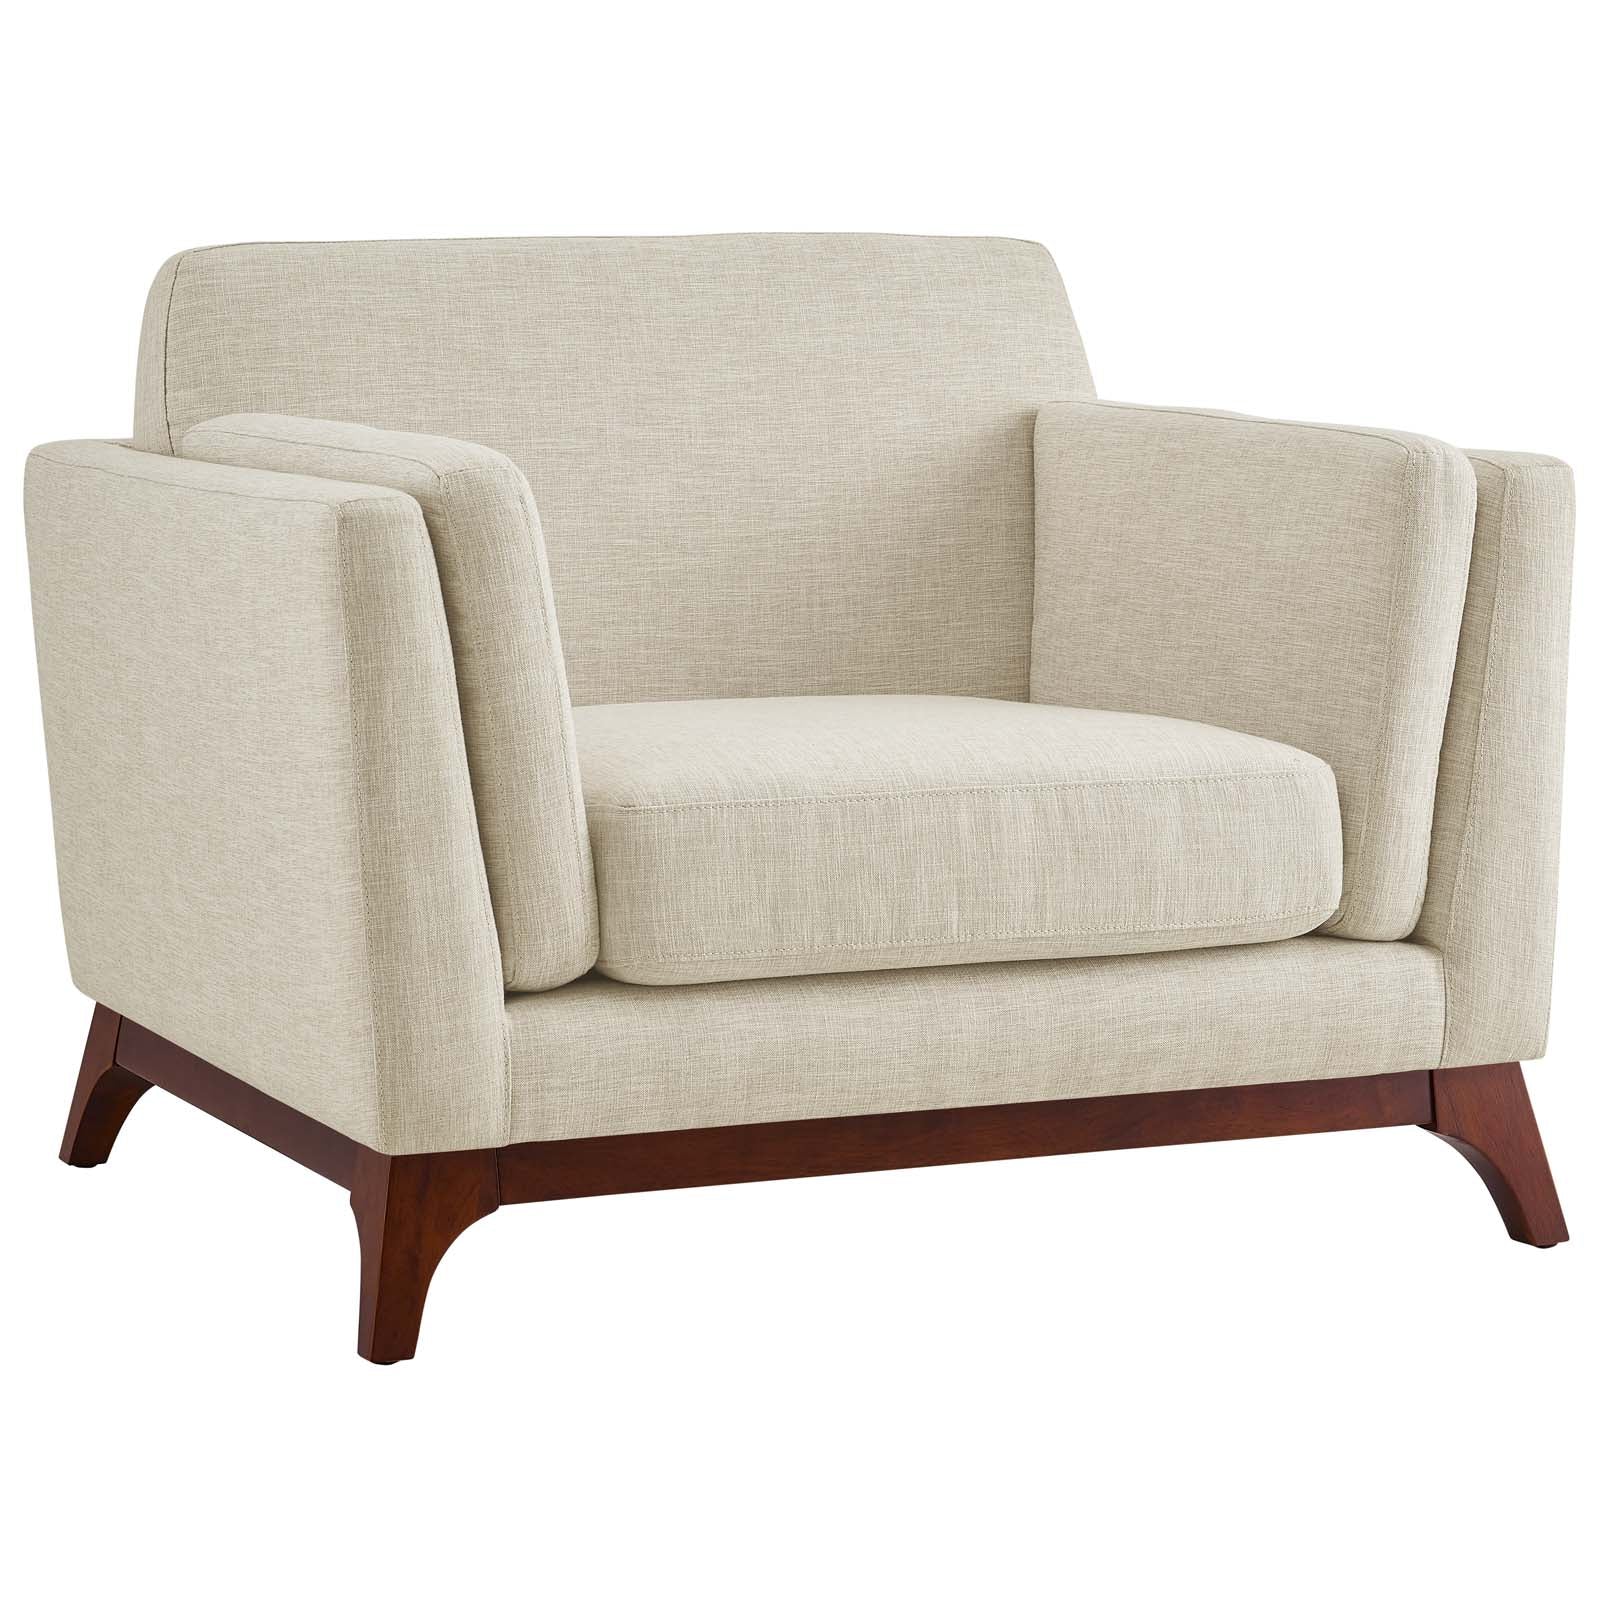 Chance Upholstered Back Accent Chair Sofa - Accent Chairs For Living Room In Tapered Legs